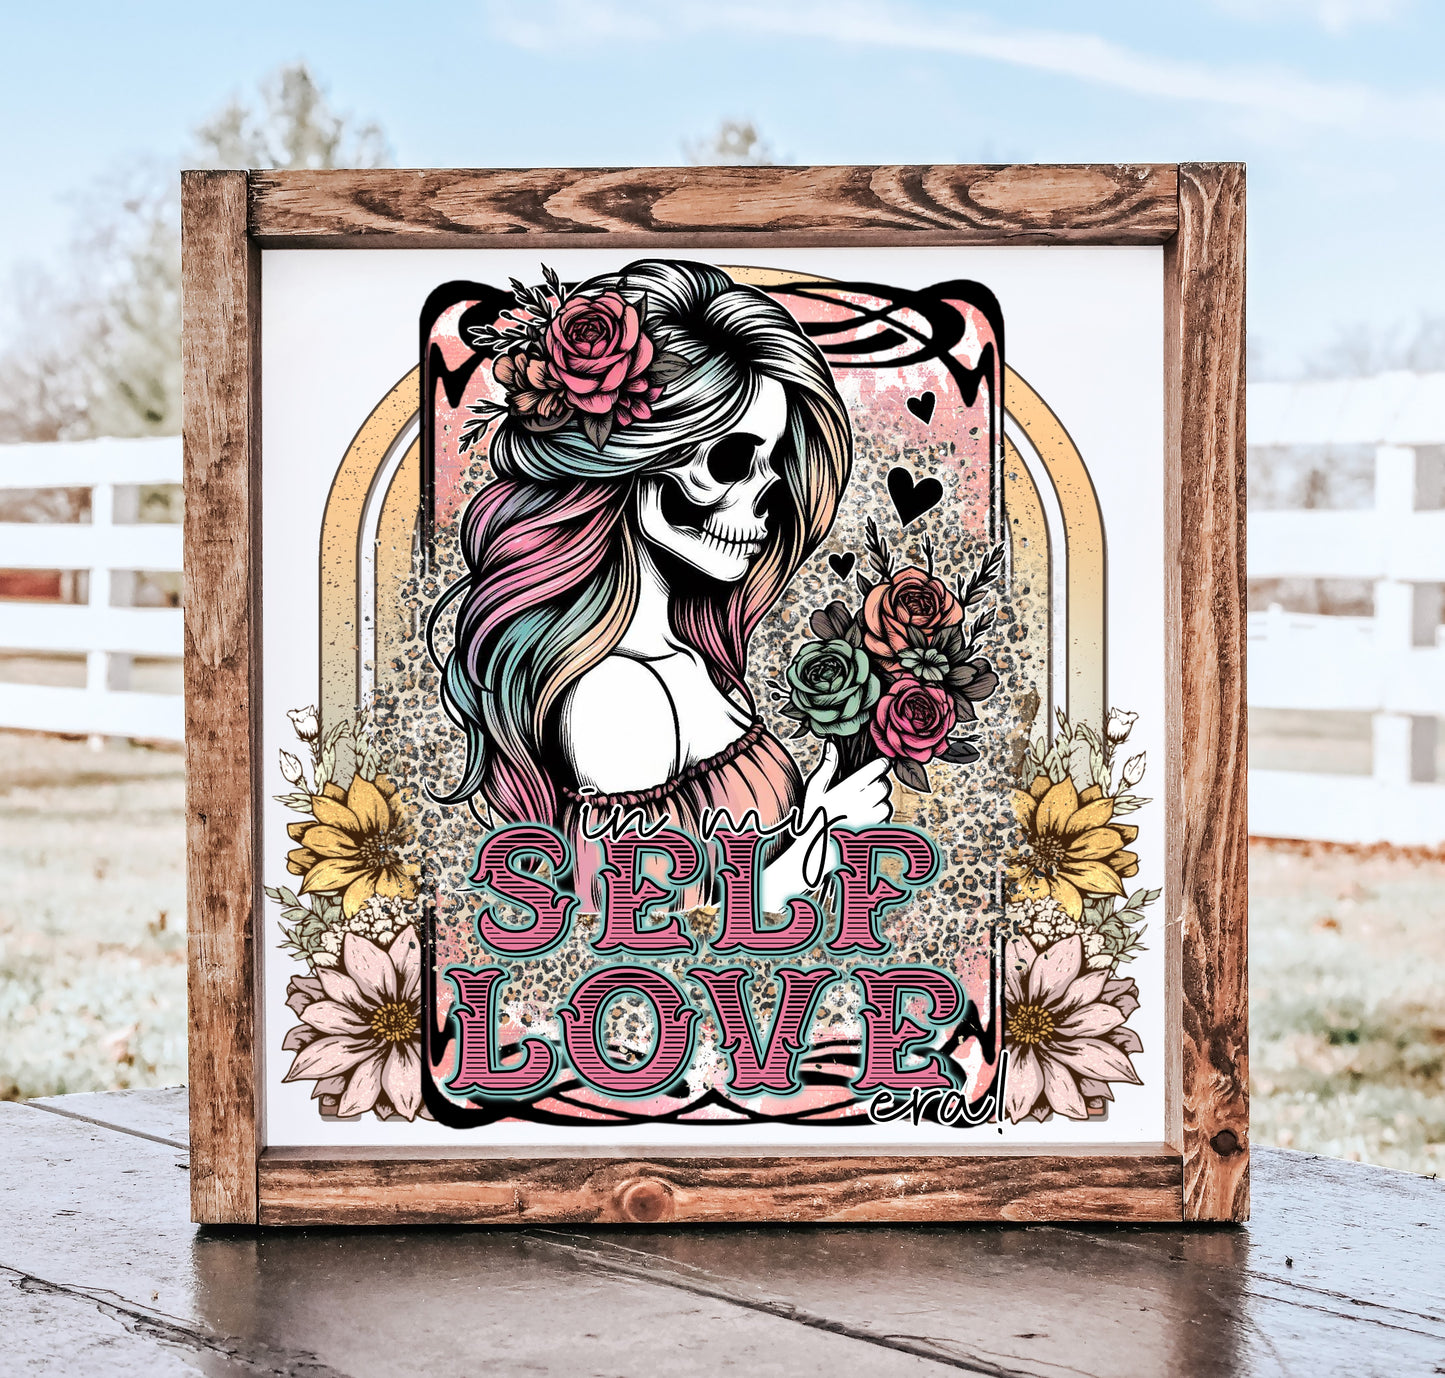 Wooden Self Love Sign - Rustic Framed Decor 7" or 13" - Handmade Gift for Home or Office